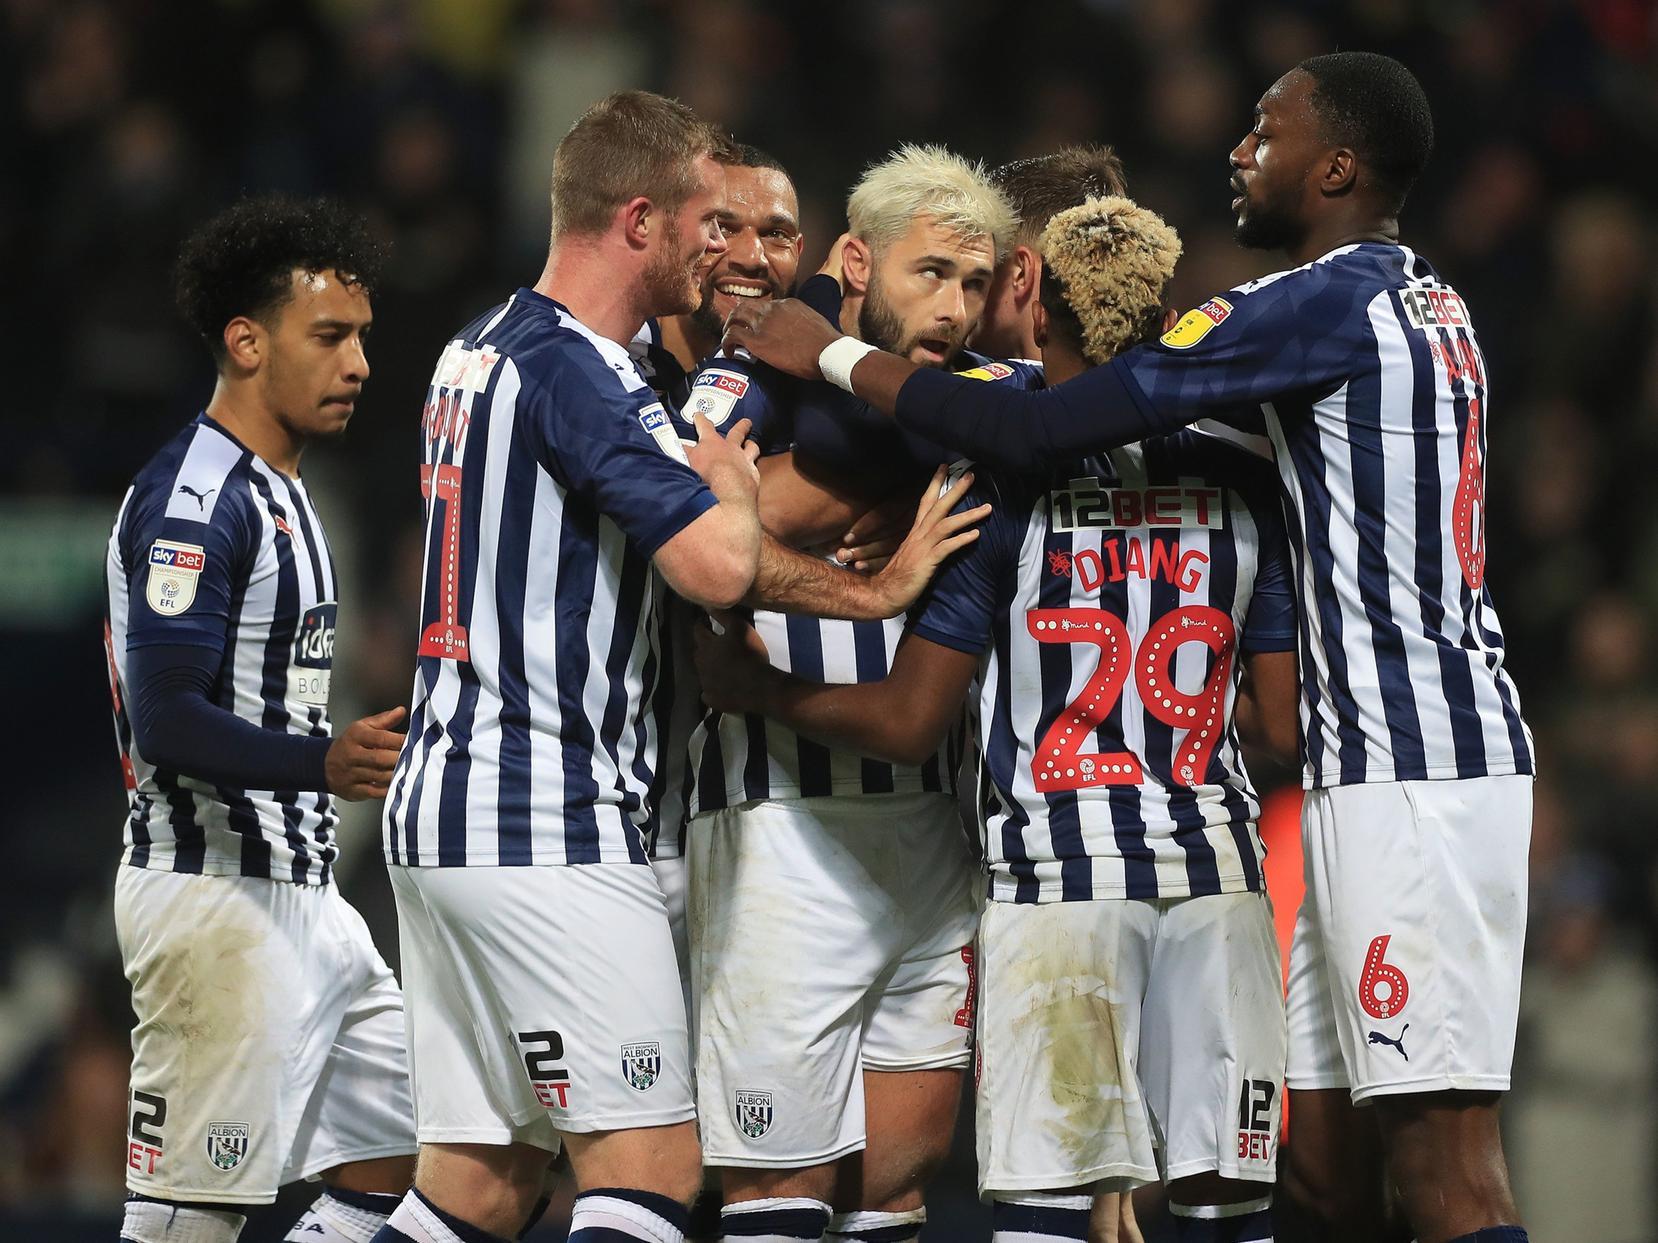 Charlie Austin dispatched a late penalty to maintain the Baggies two-point advantage over Leeds United, and Whites midfielder Adam Forshaw believes whoever finishes above West Brom will get promoted.